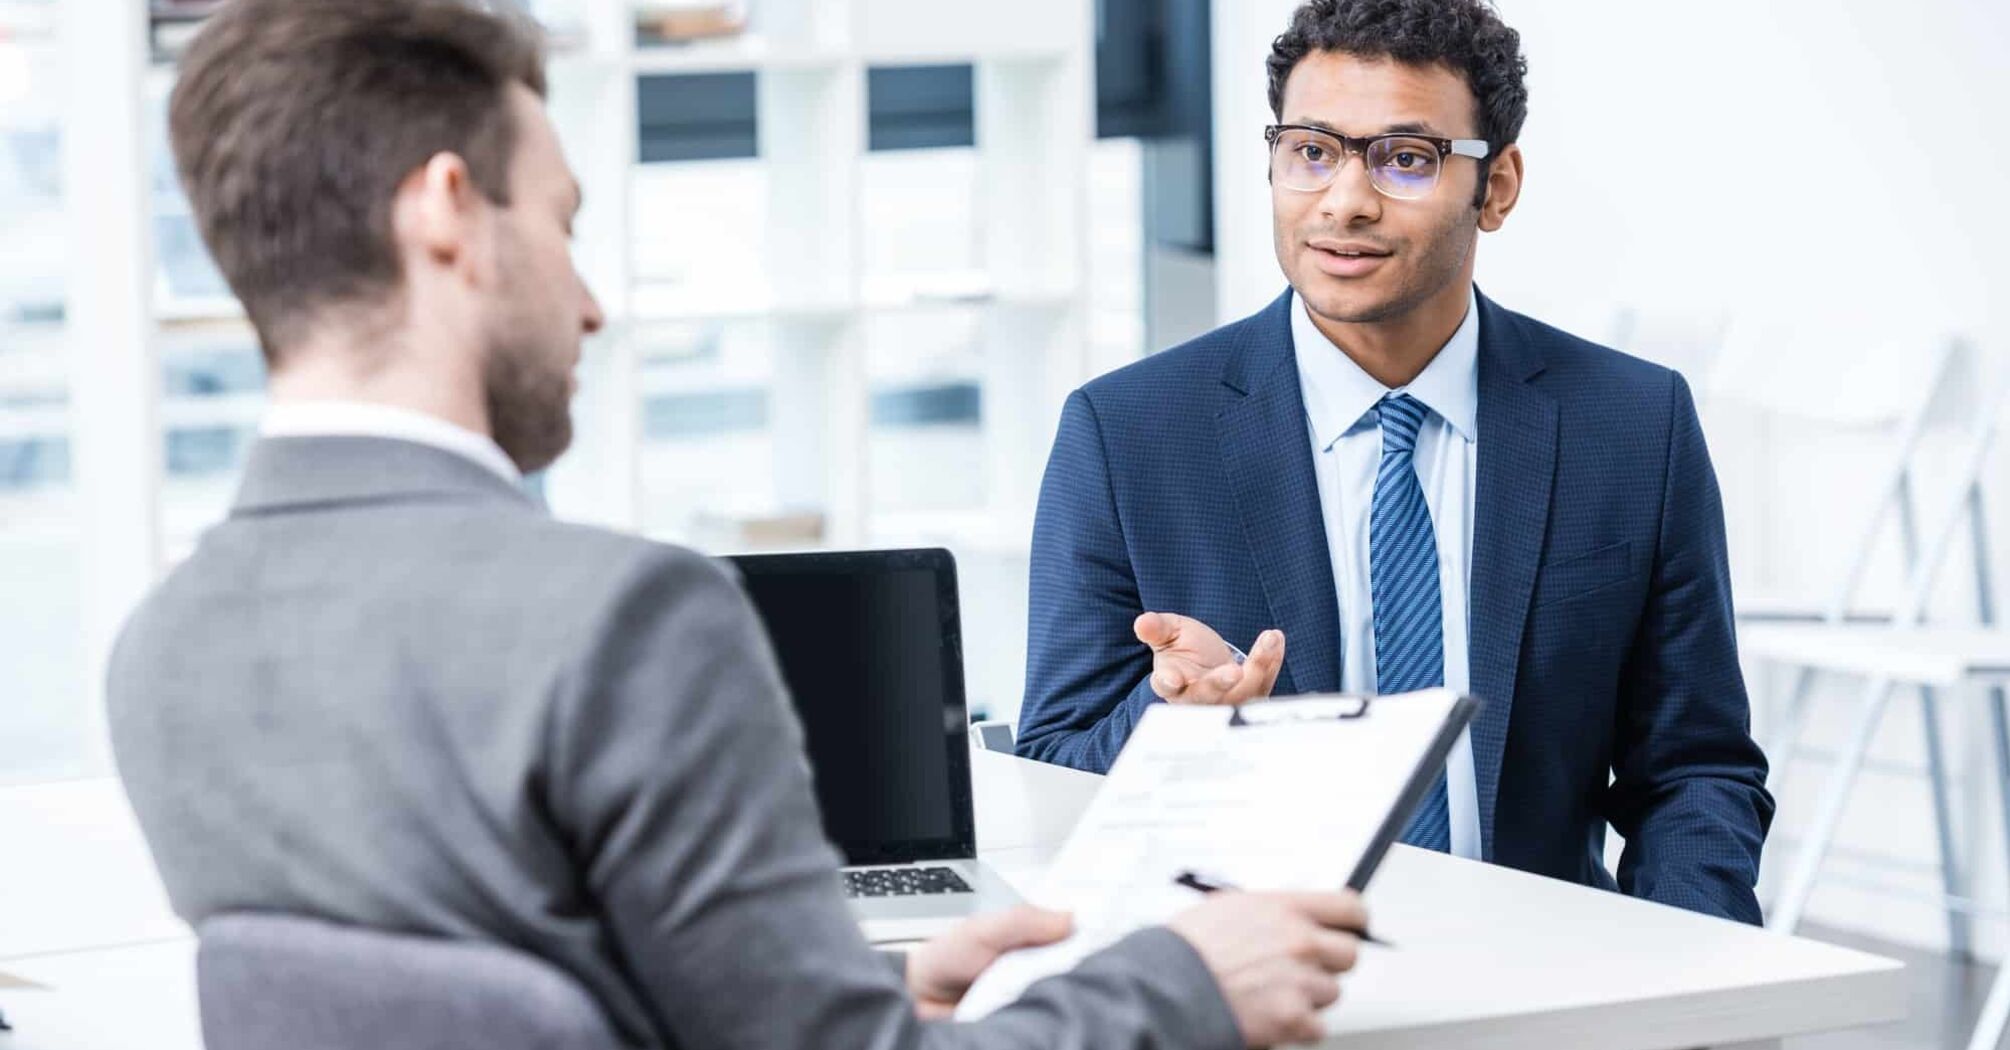 Man ruins job interview chances in just 2 minutes after awkward answer to easy question